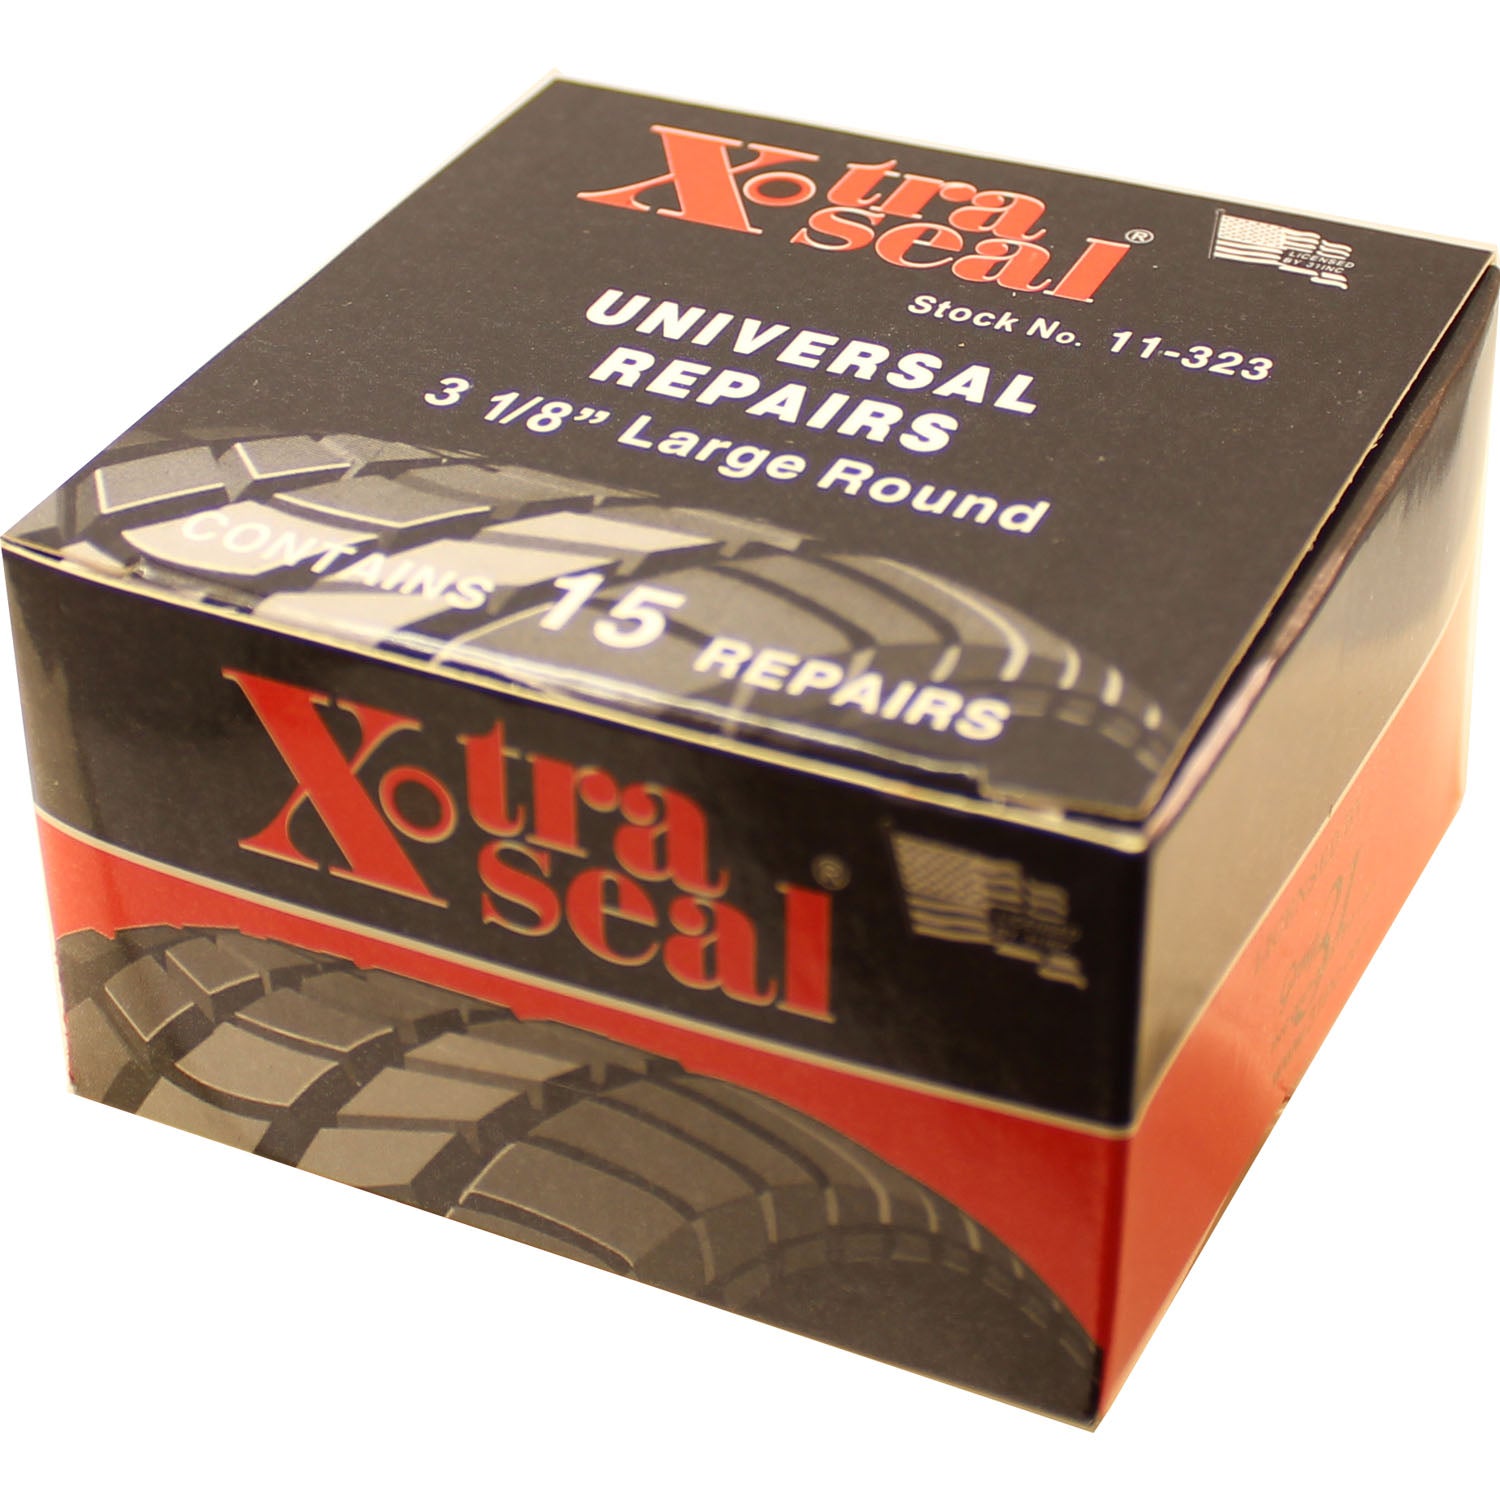 Xtra Seal 11-323 Large Round Style 3-1/4" Universal Tire Repair Patch Box of 15